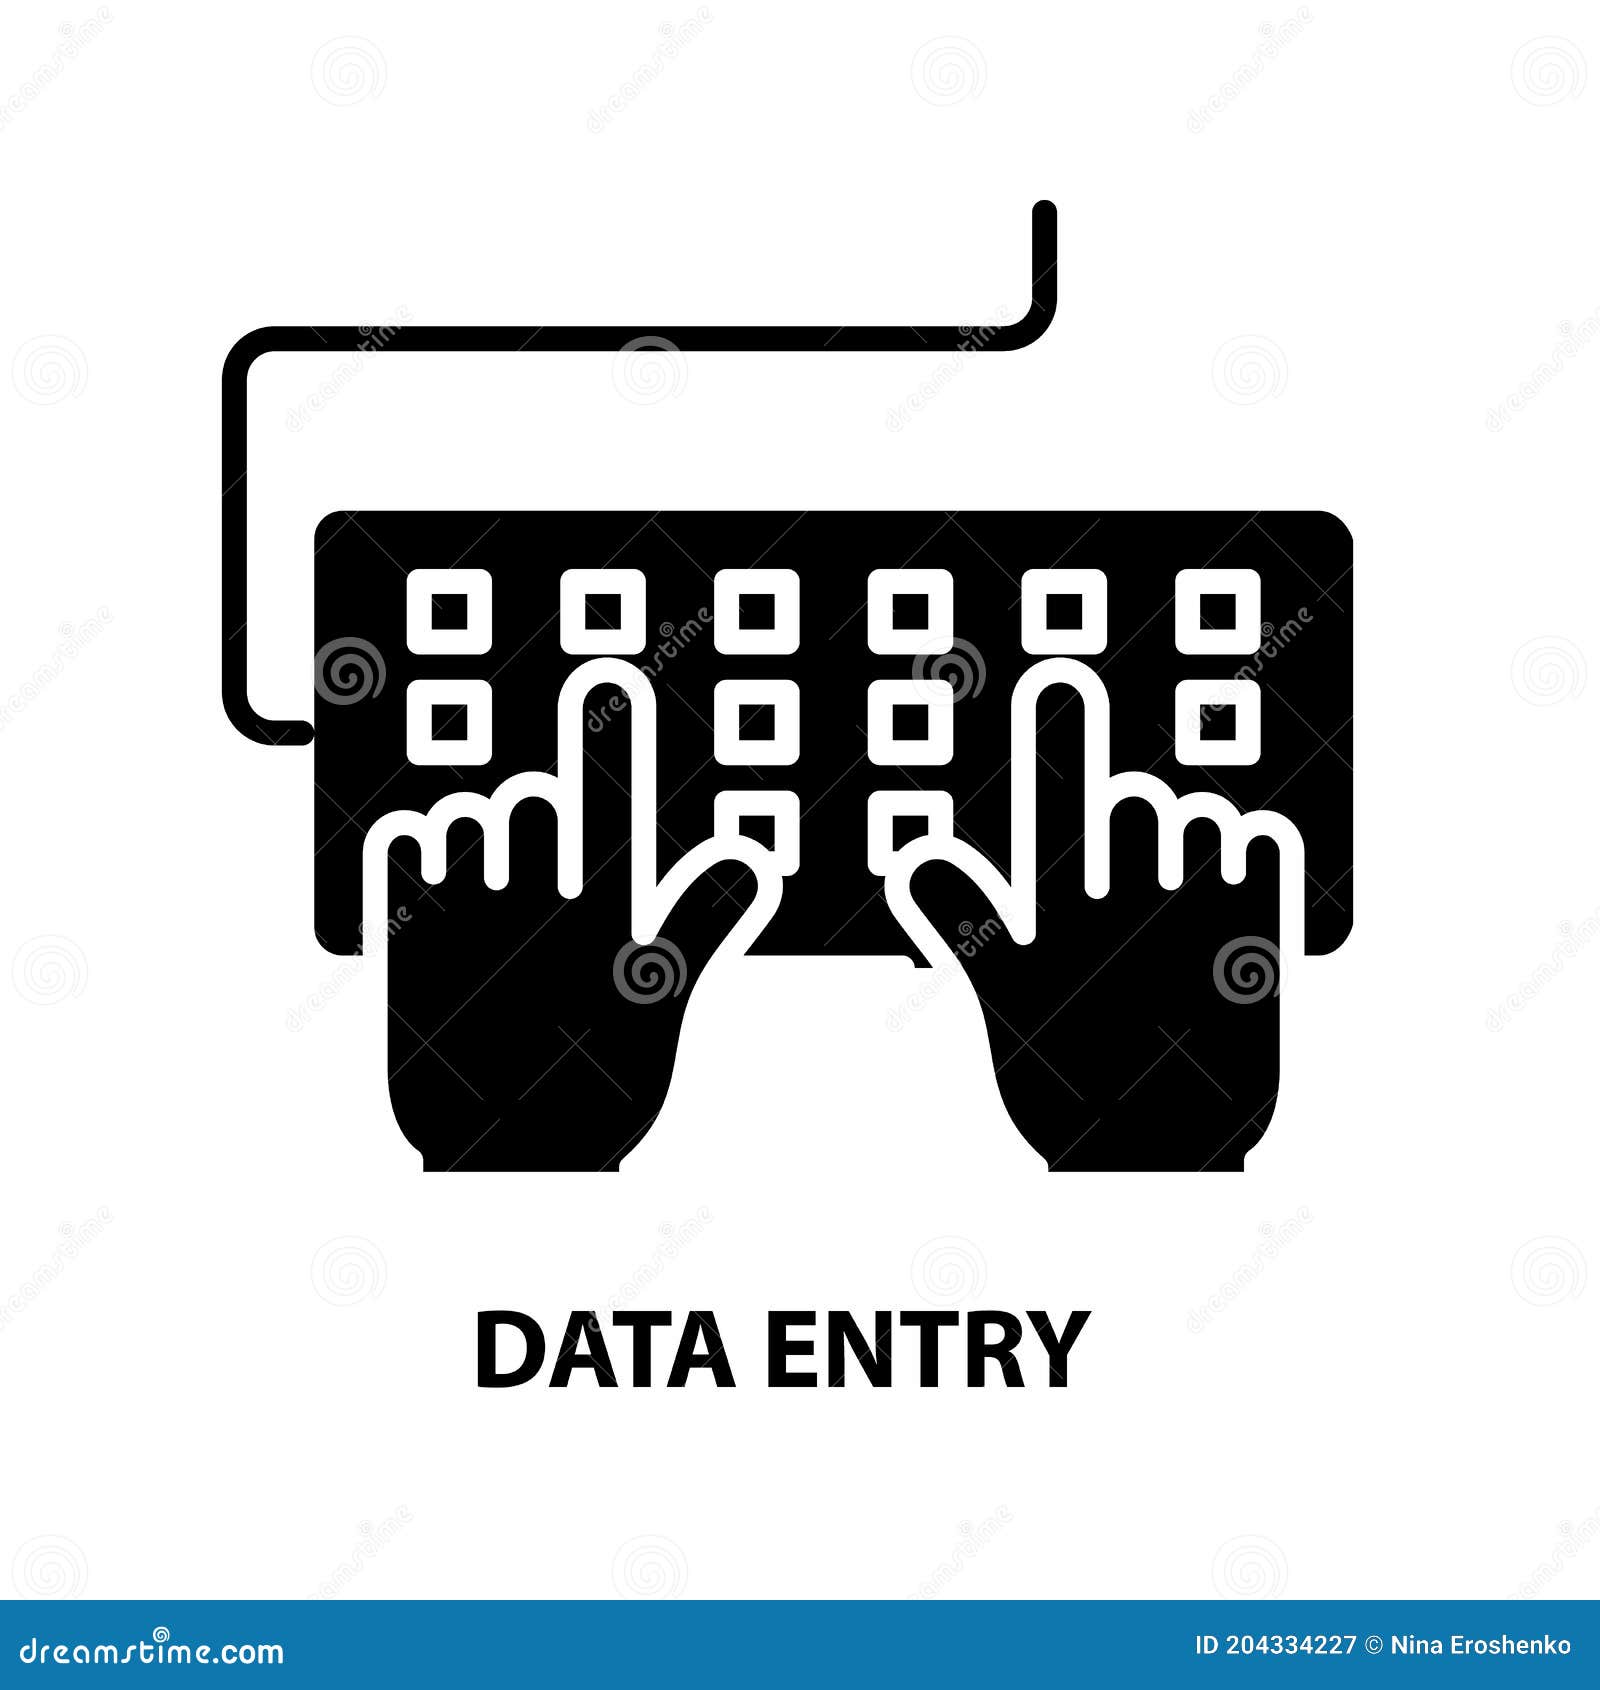 data entry icon, black  sign with  strokes, concept 